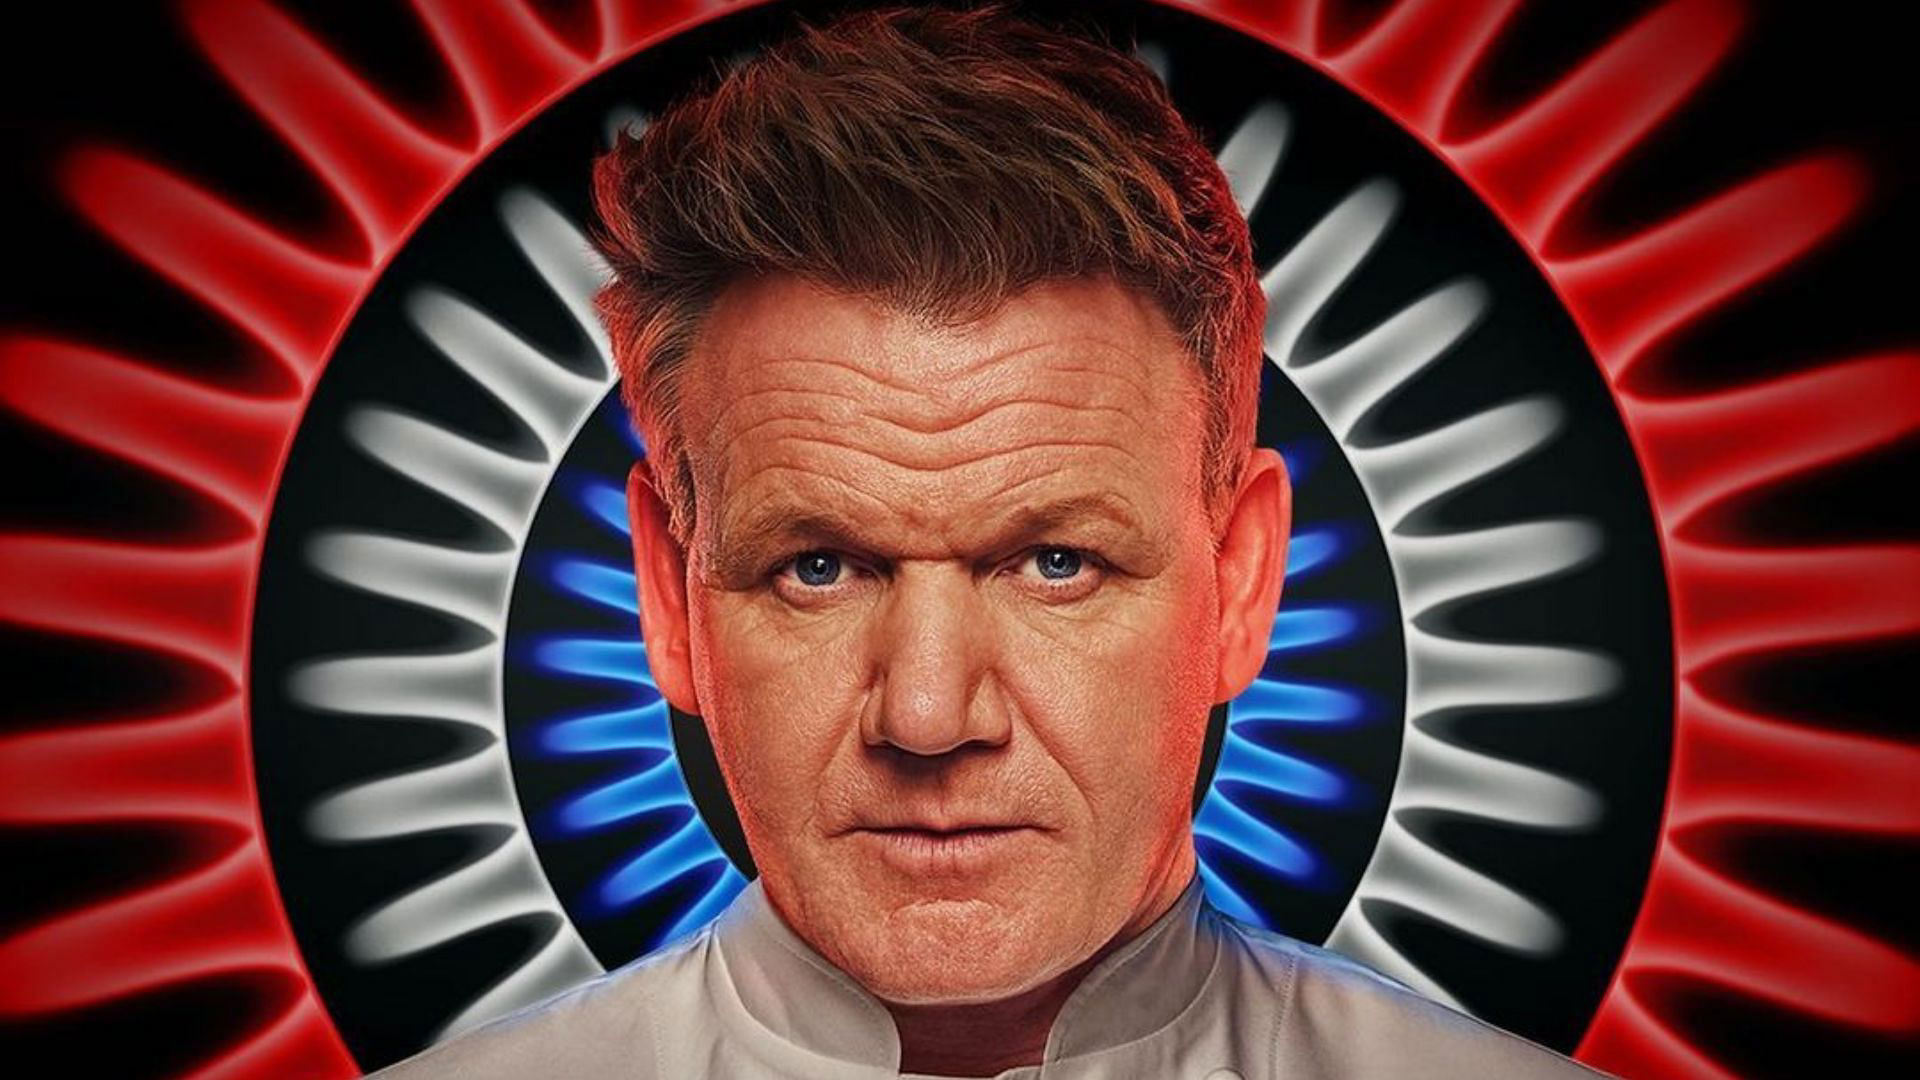 Hell's Kitchen season 22: Release date, time, cast, plot, and more